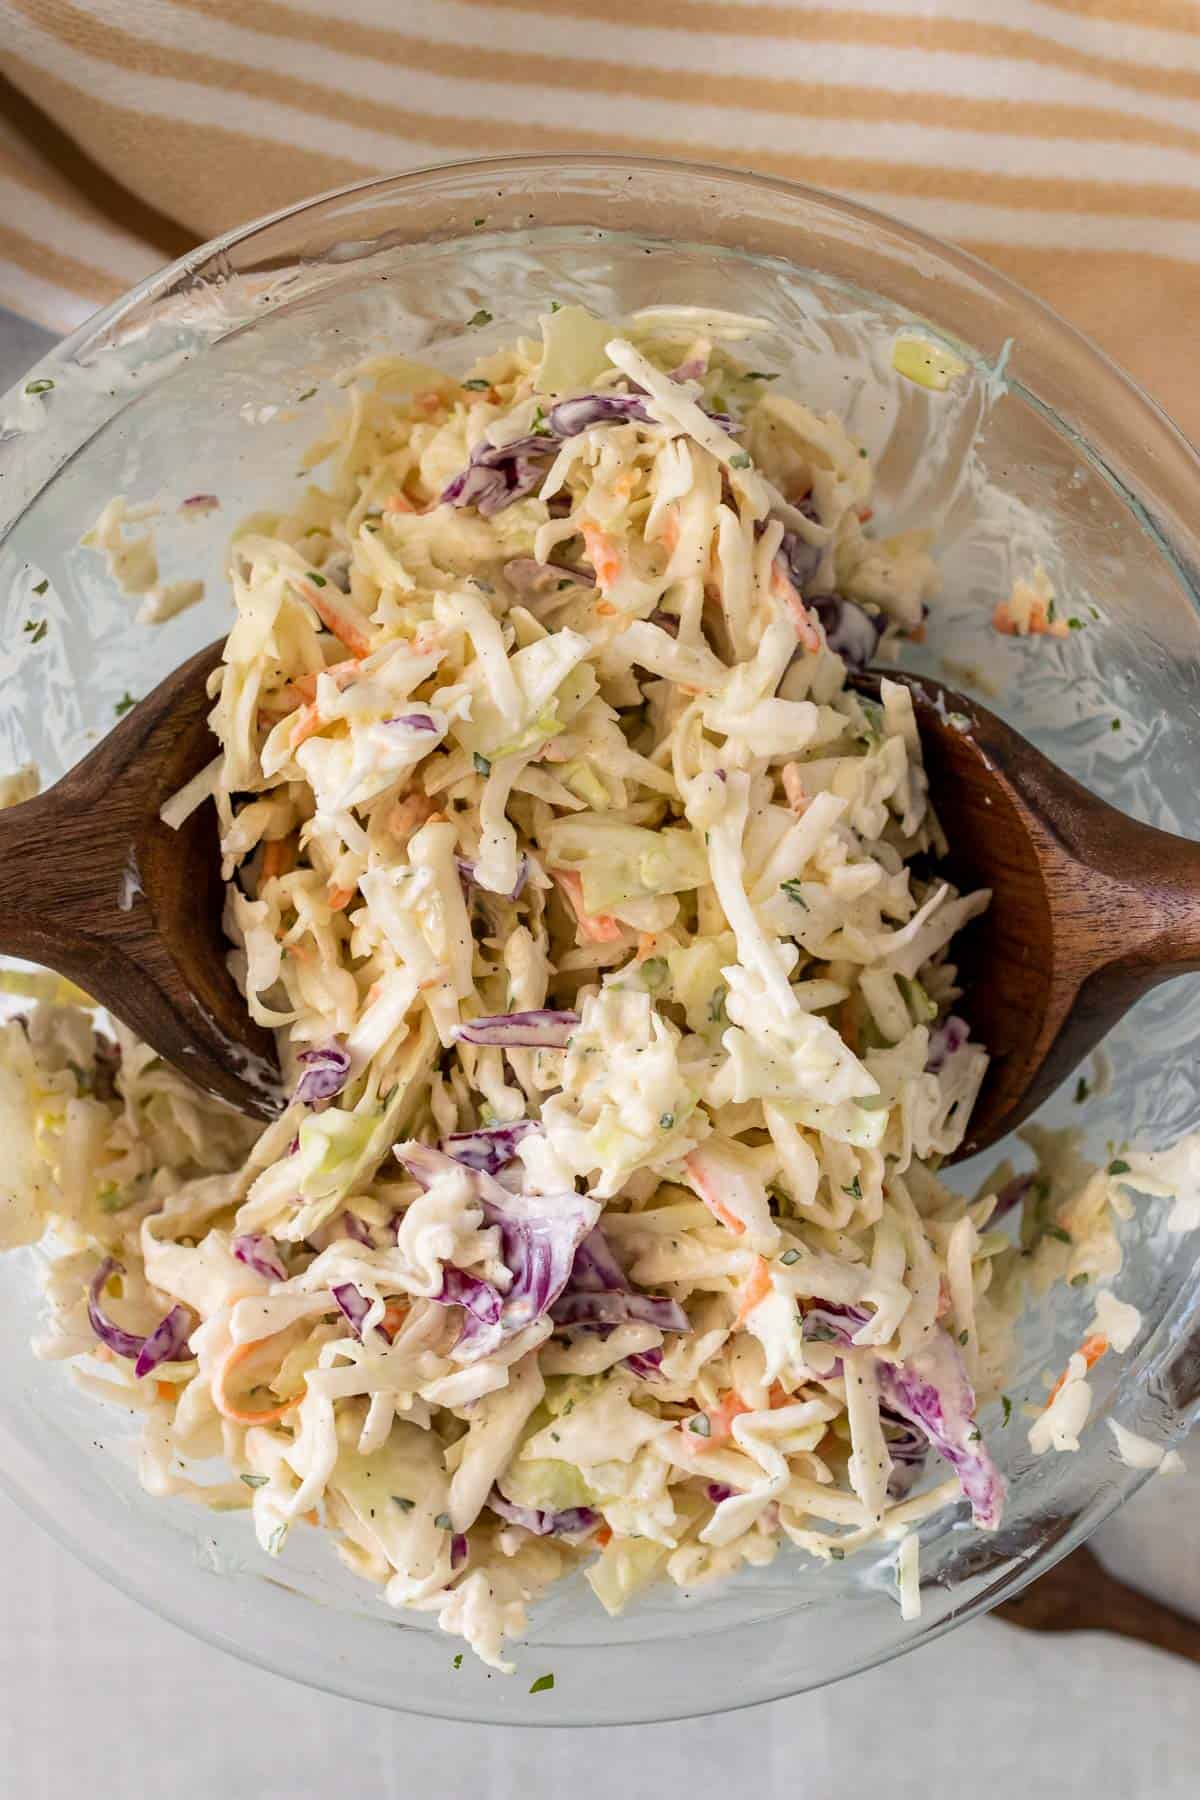 Coleslaw in a glass bowl being served with wooden serving utensils